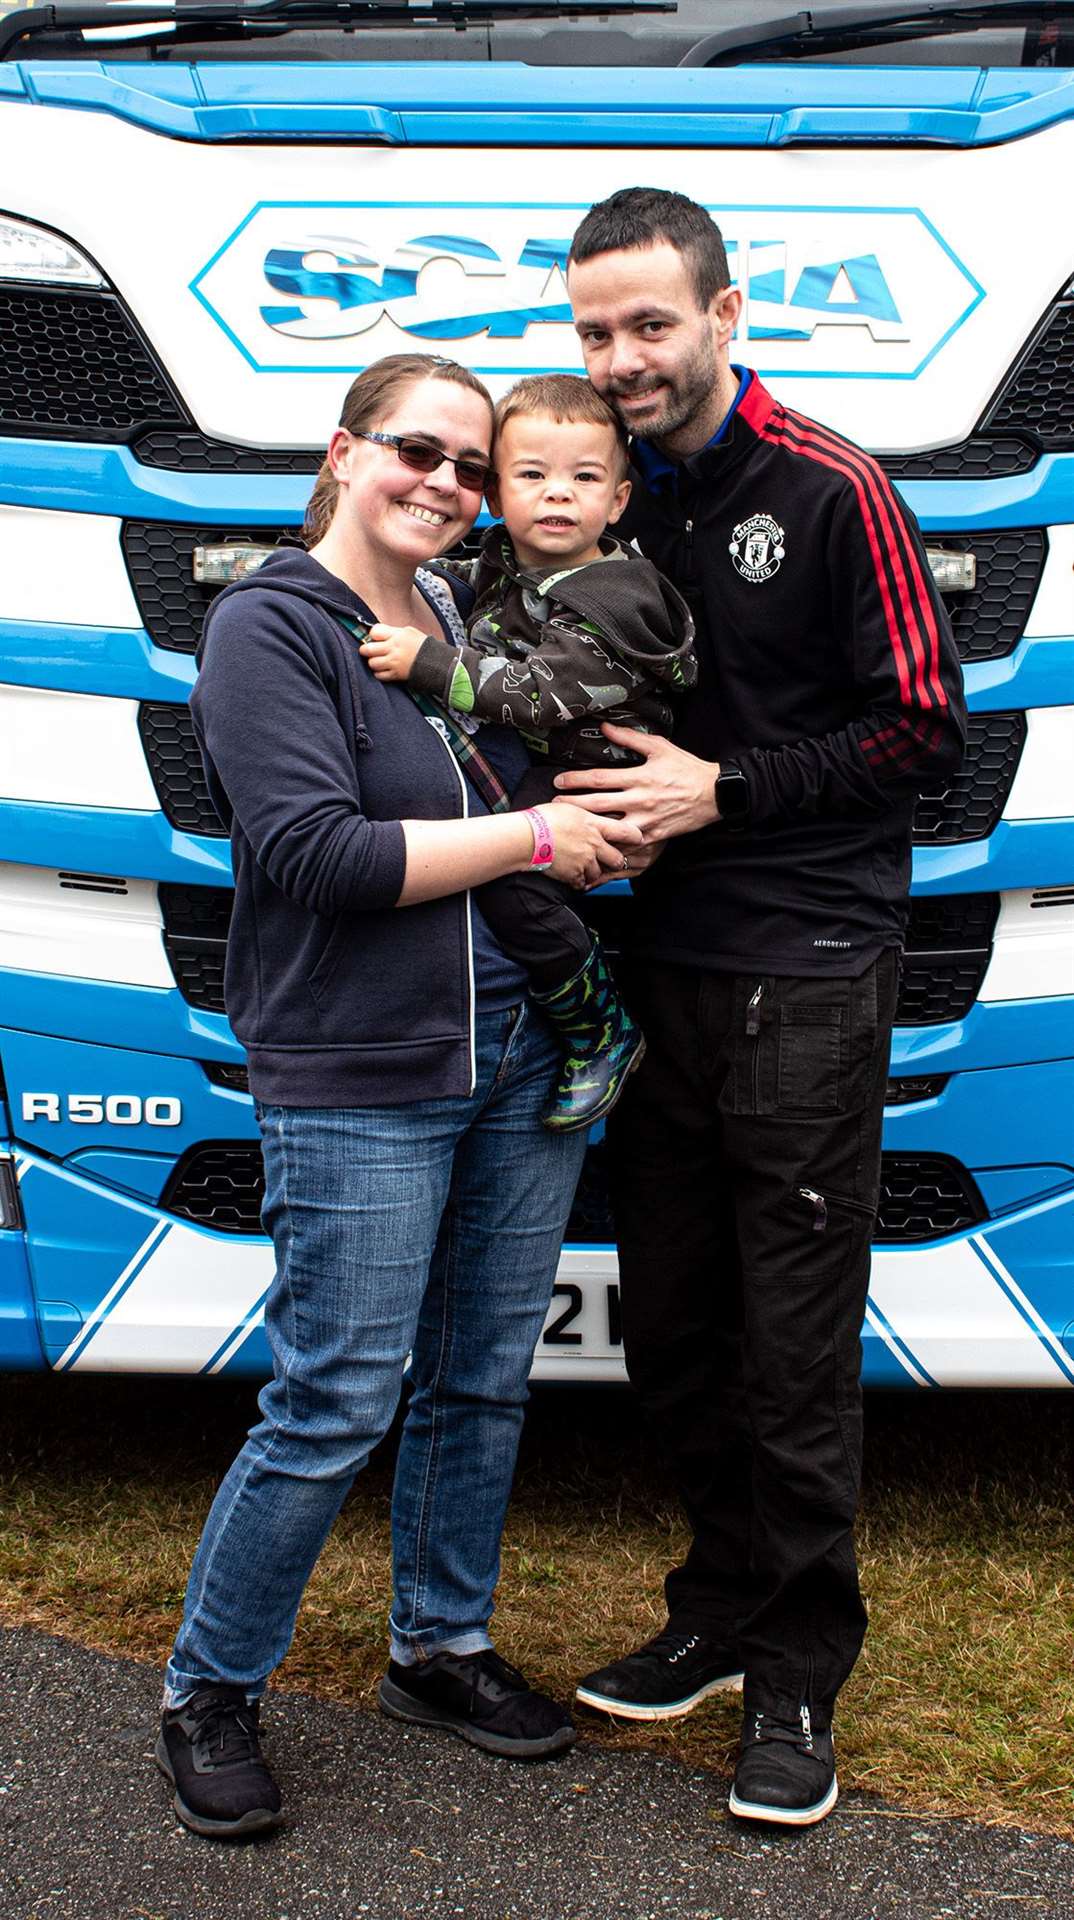 The Mackinnons, from Alness, enjoyed themselves at Truckness. Photo: Niall Harkiss